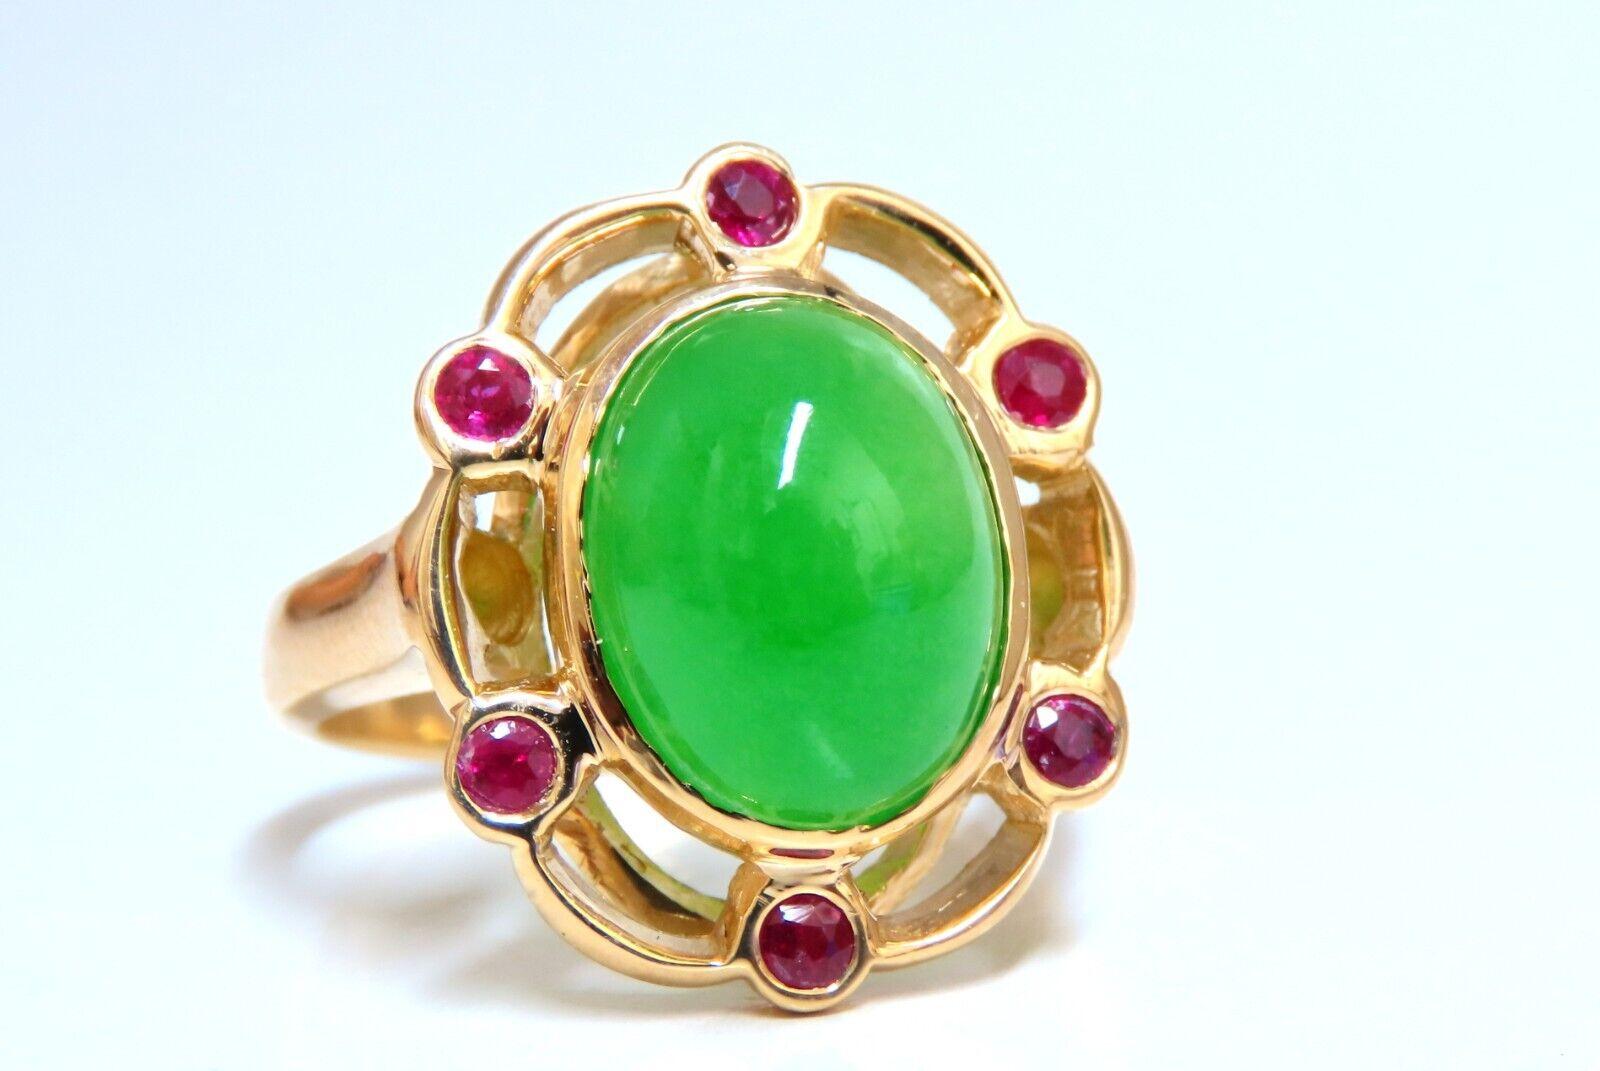 Jade ring.

Jade measures 12 x 10mm.

Impregnated, treated, and dyed.

. 50ct natural round rubies.

Full cut rounds

Clean clarity and transparent

Depth of ring 10 mm

Deck of Ring 21 x 18mm

14 karat yellow gold 8.6 grams

Size 7.75 and we may